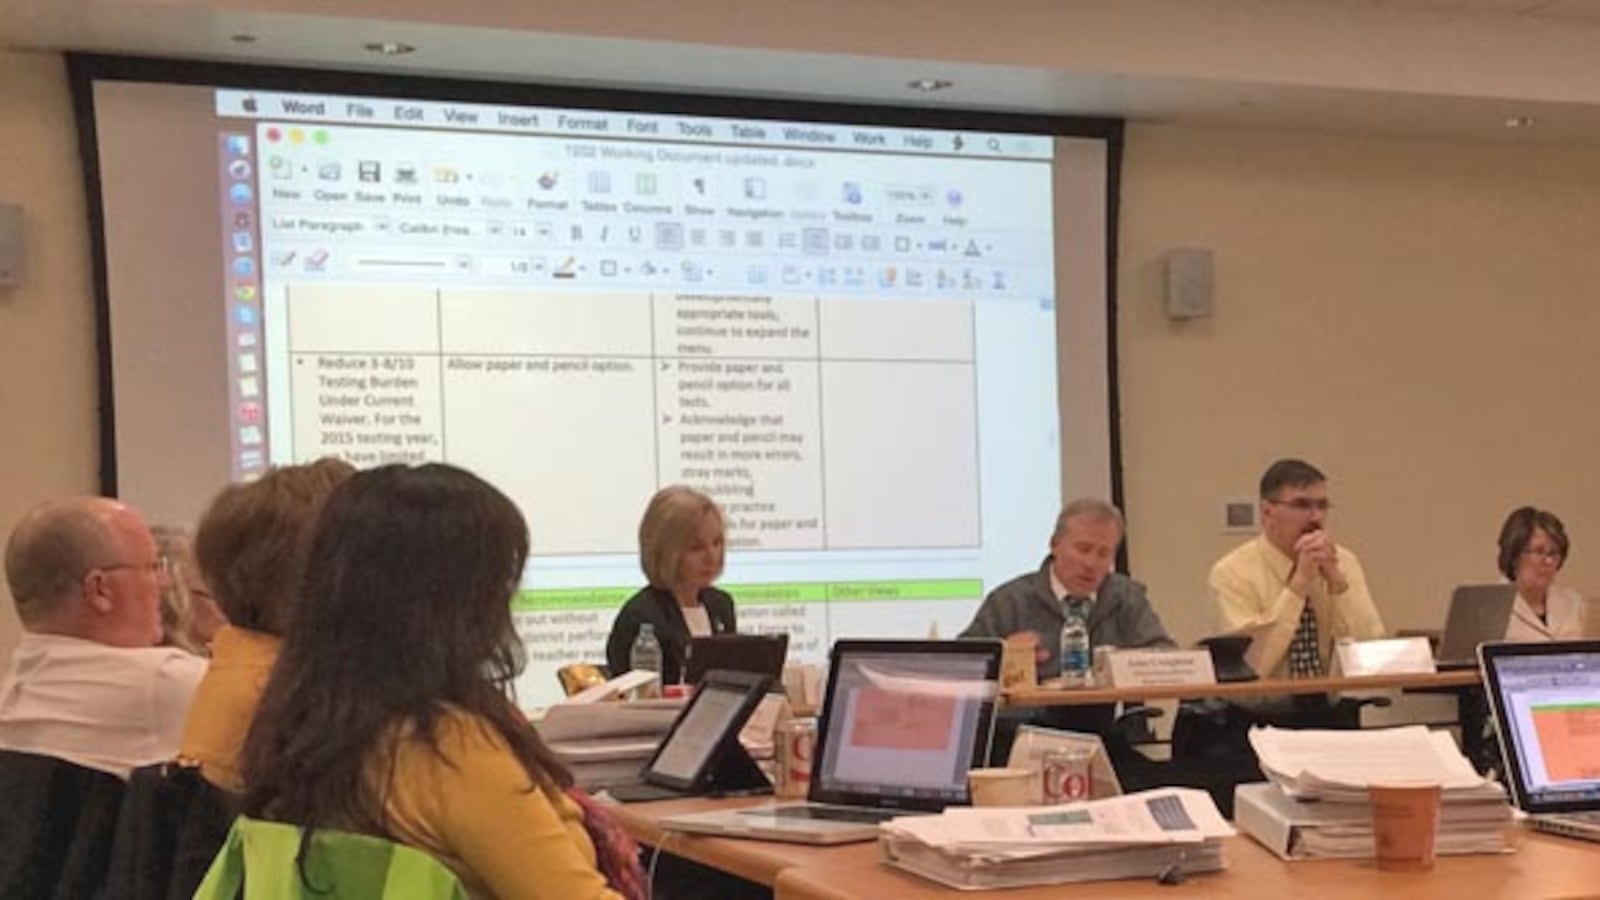 Members of Standards and Assessments Task Force slowly worked through their recommendations as changes were tracked in a document project on screens in the meeting room.